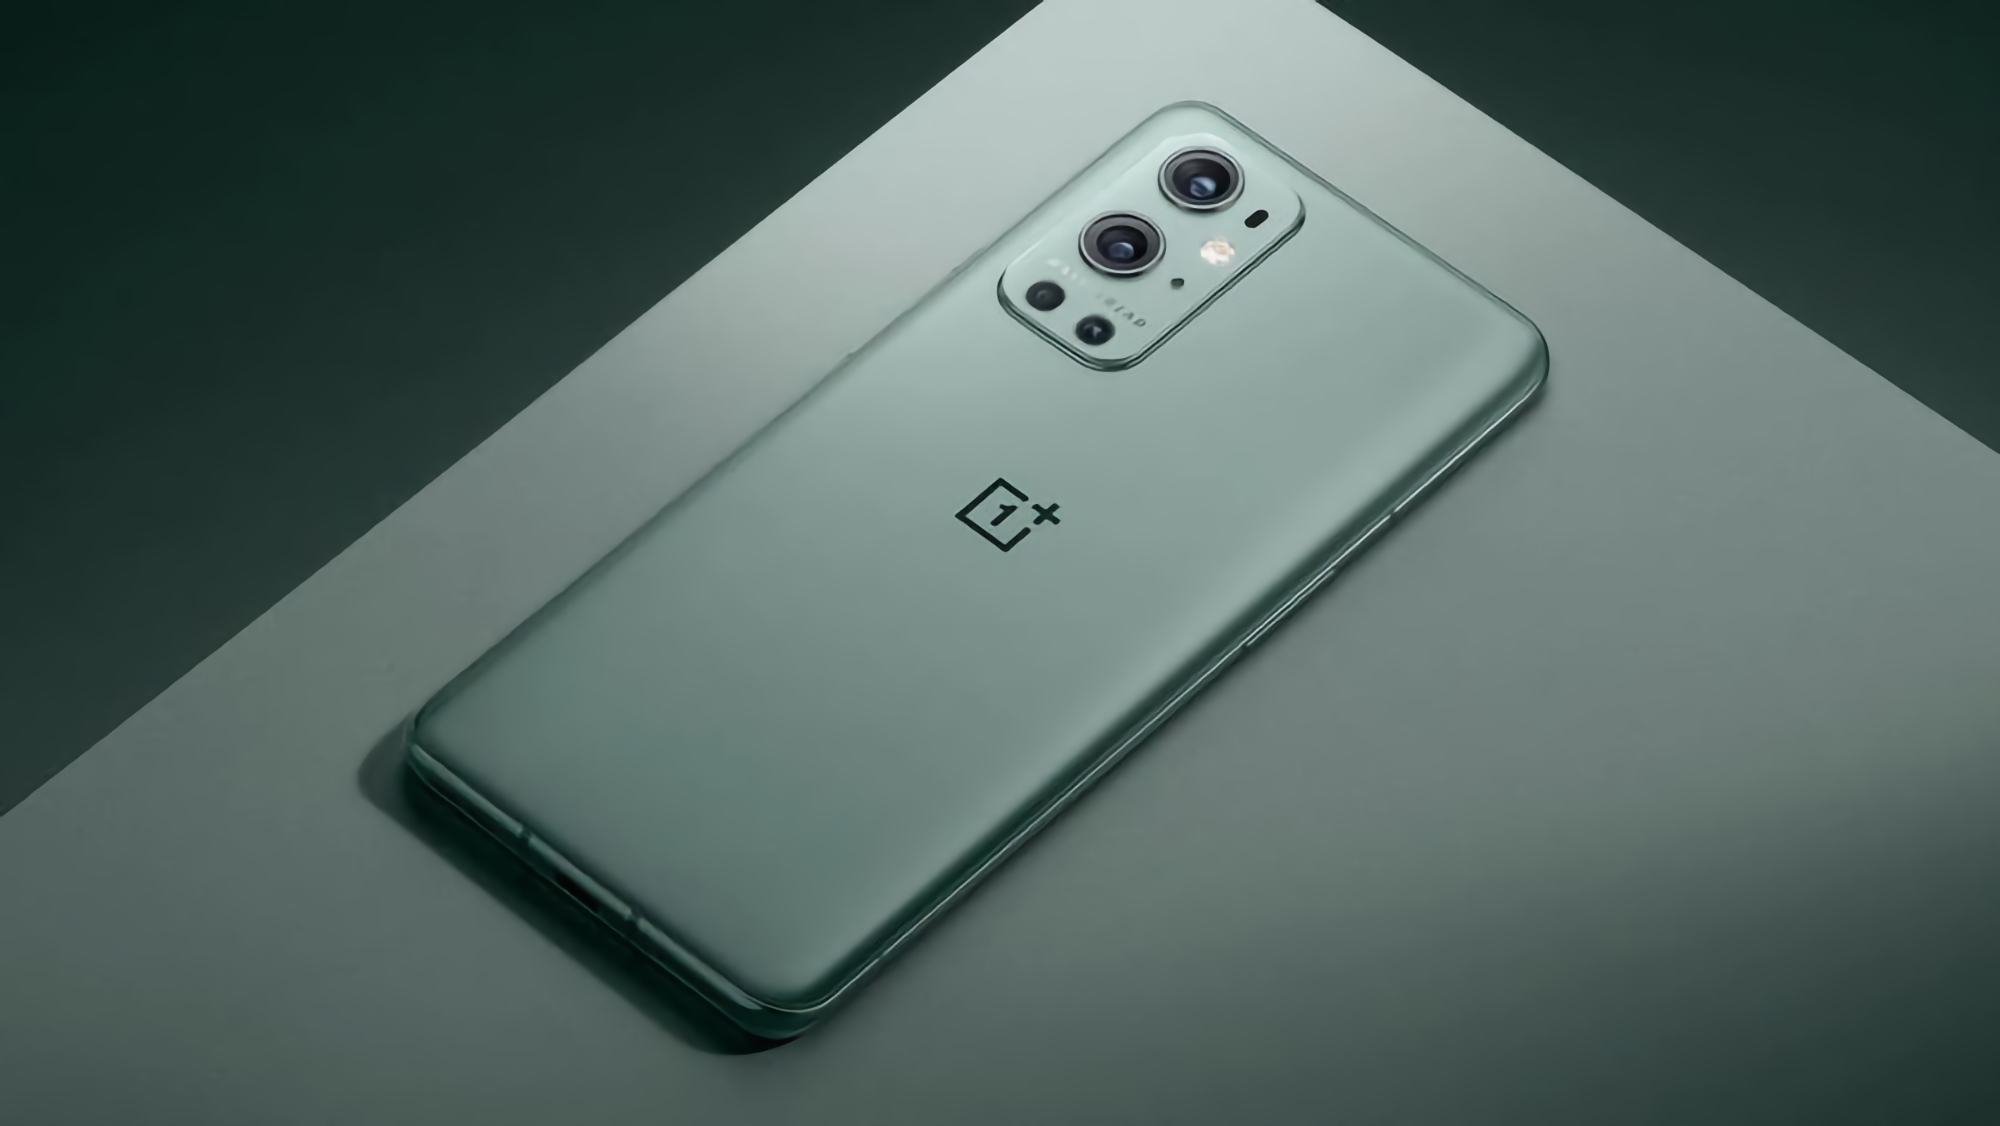 OnePlus launches Android 13 beta testing program with OxygenOS 13 filmware for OnePlus 9RT